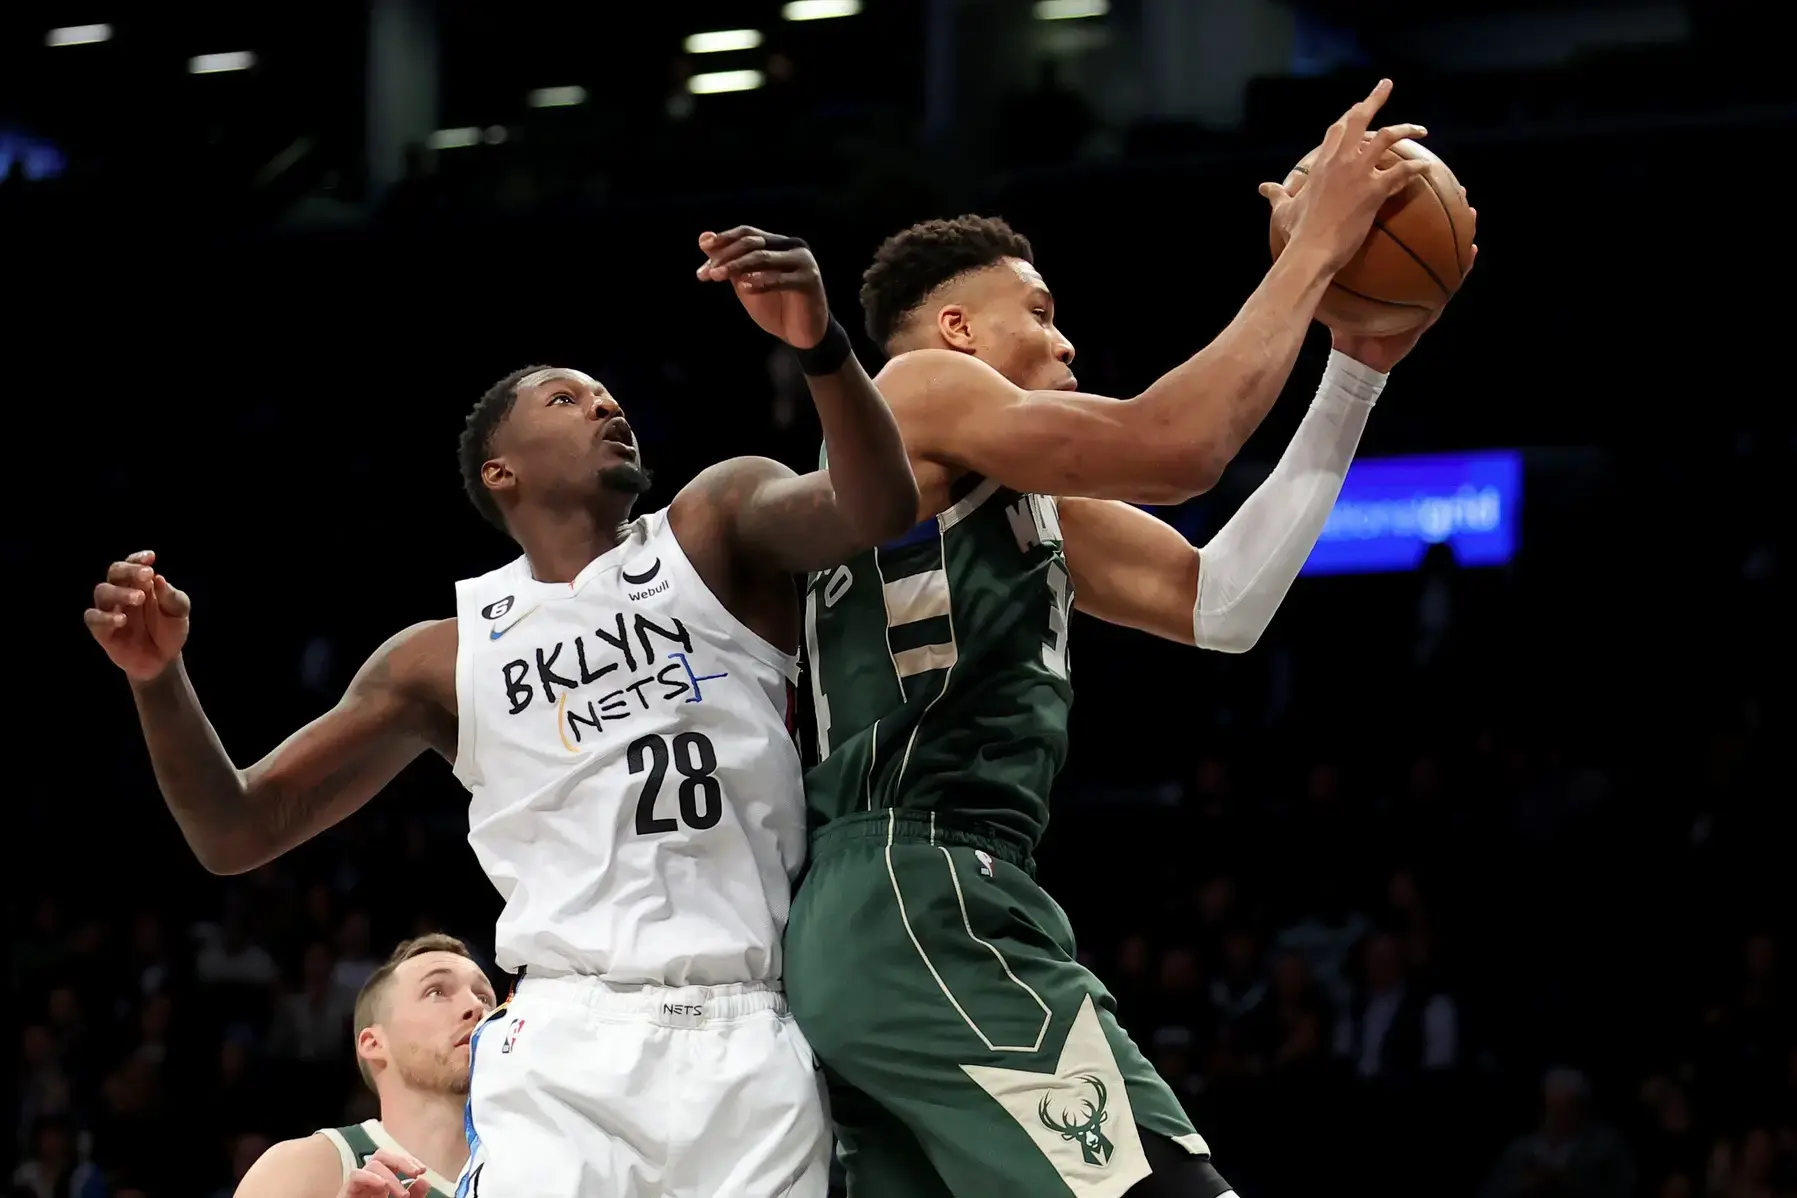 Milwaukee Bucks forward Giannis Antetokounmpo (34) grabs a rebound against Brooklyn Nets forward Dorian Finney-Smith (28) during the first quarter at Barclays Center. / Brad Penner-USA TODAY Sports